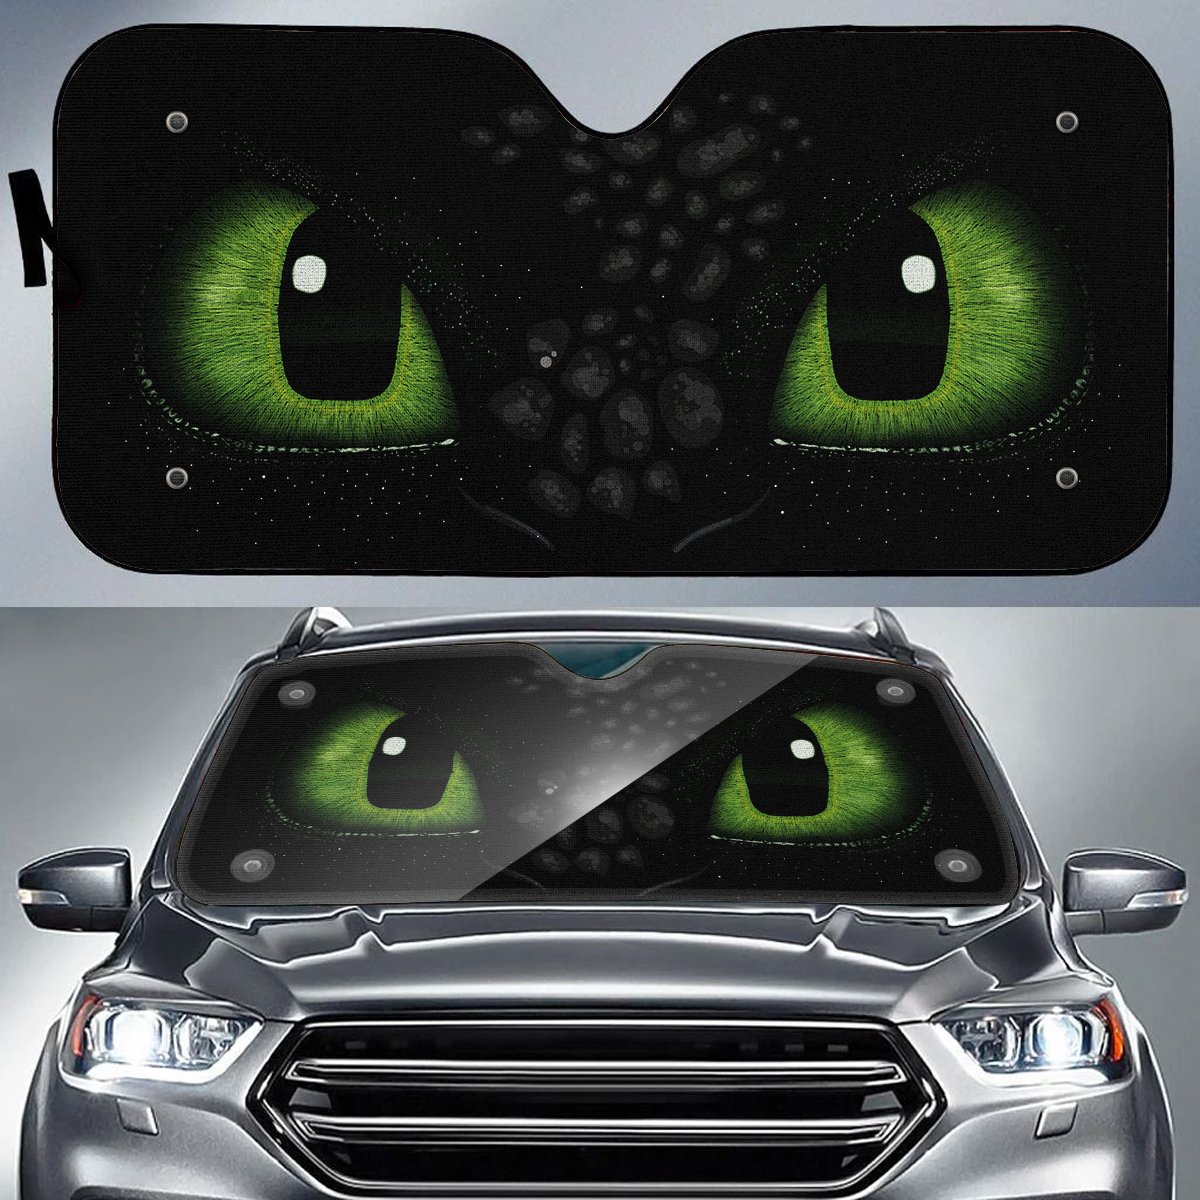 How to train your dragon toothless eyes auto sun shade – maria